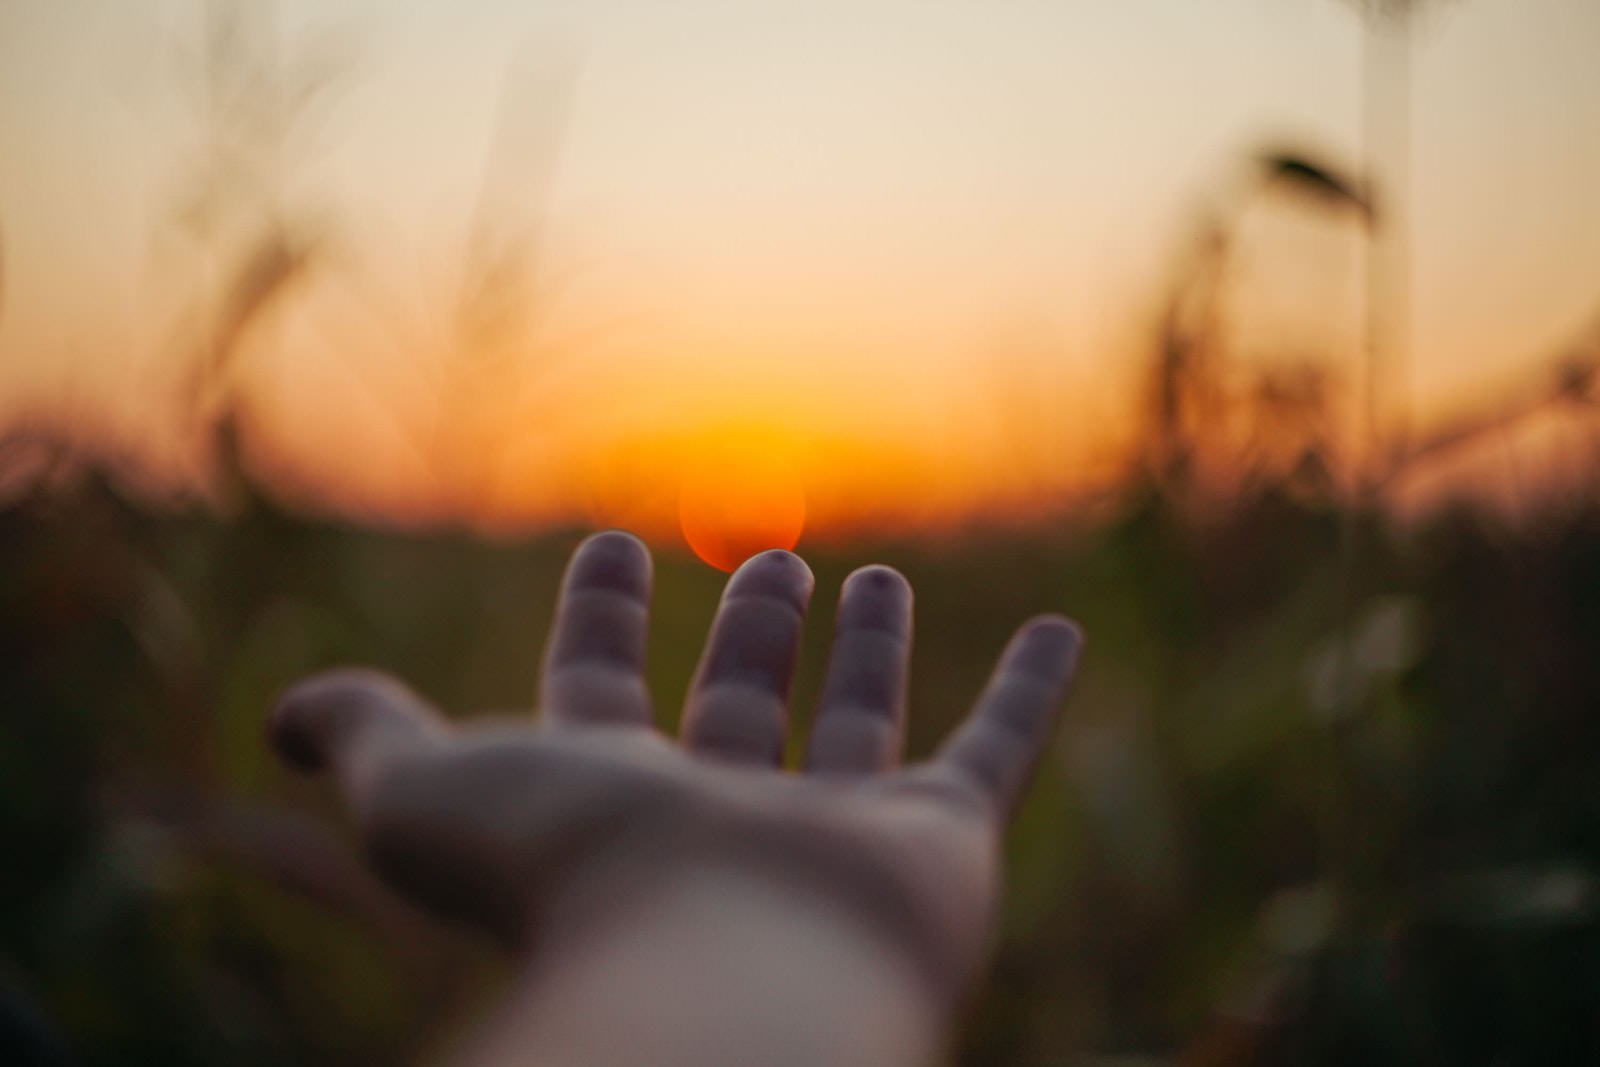 A photo of an open hand against a sunrise